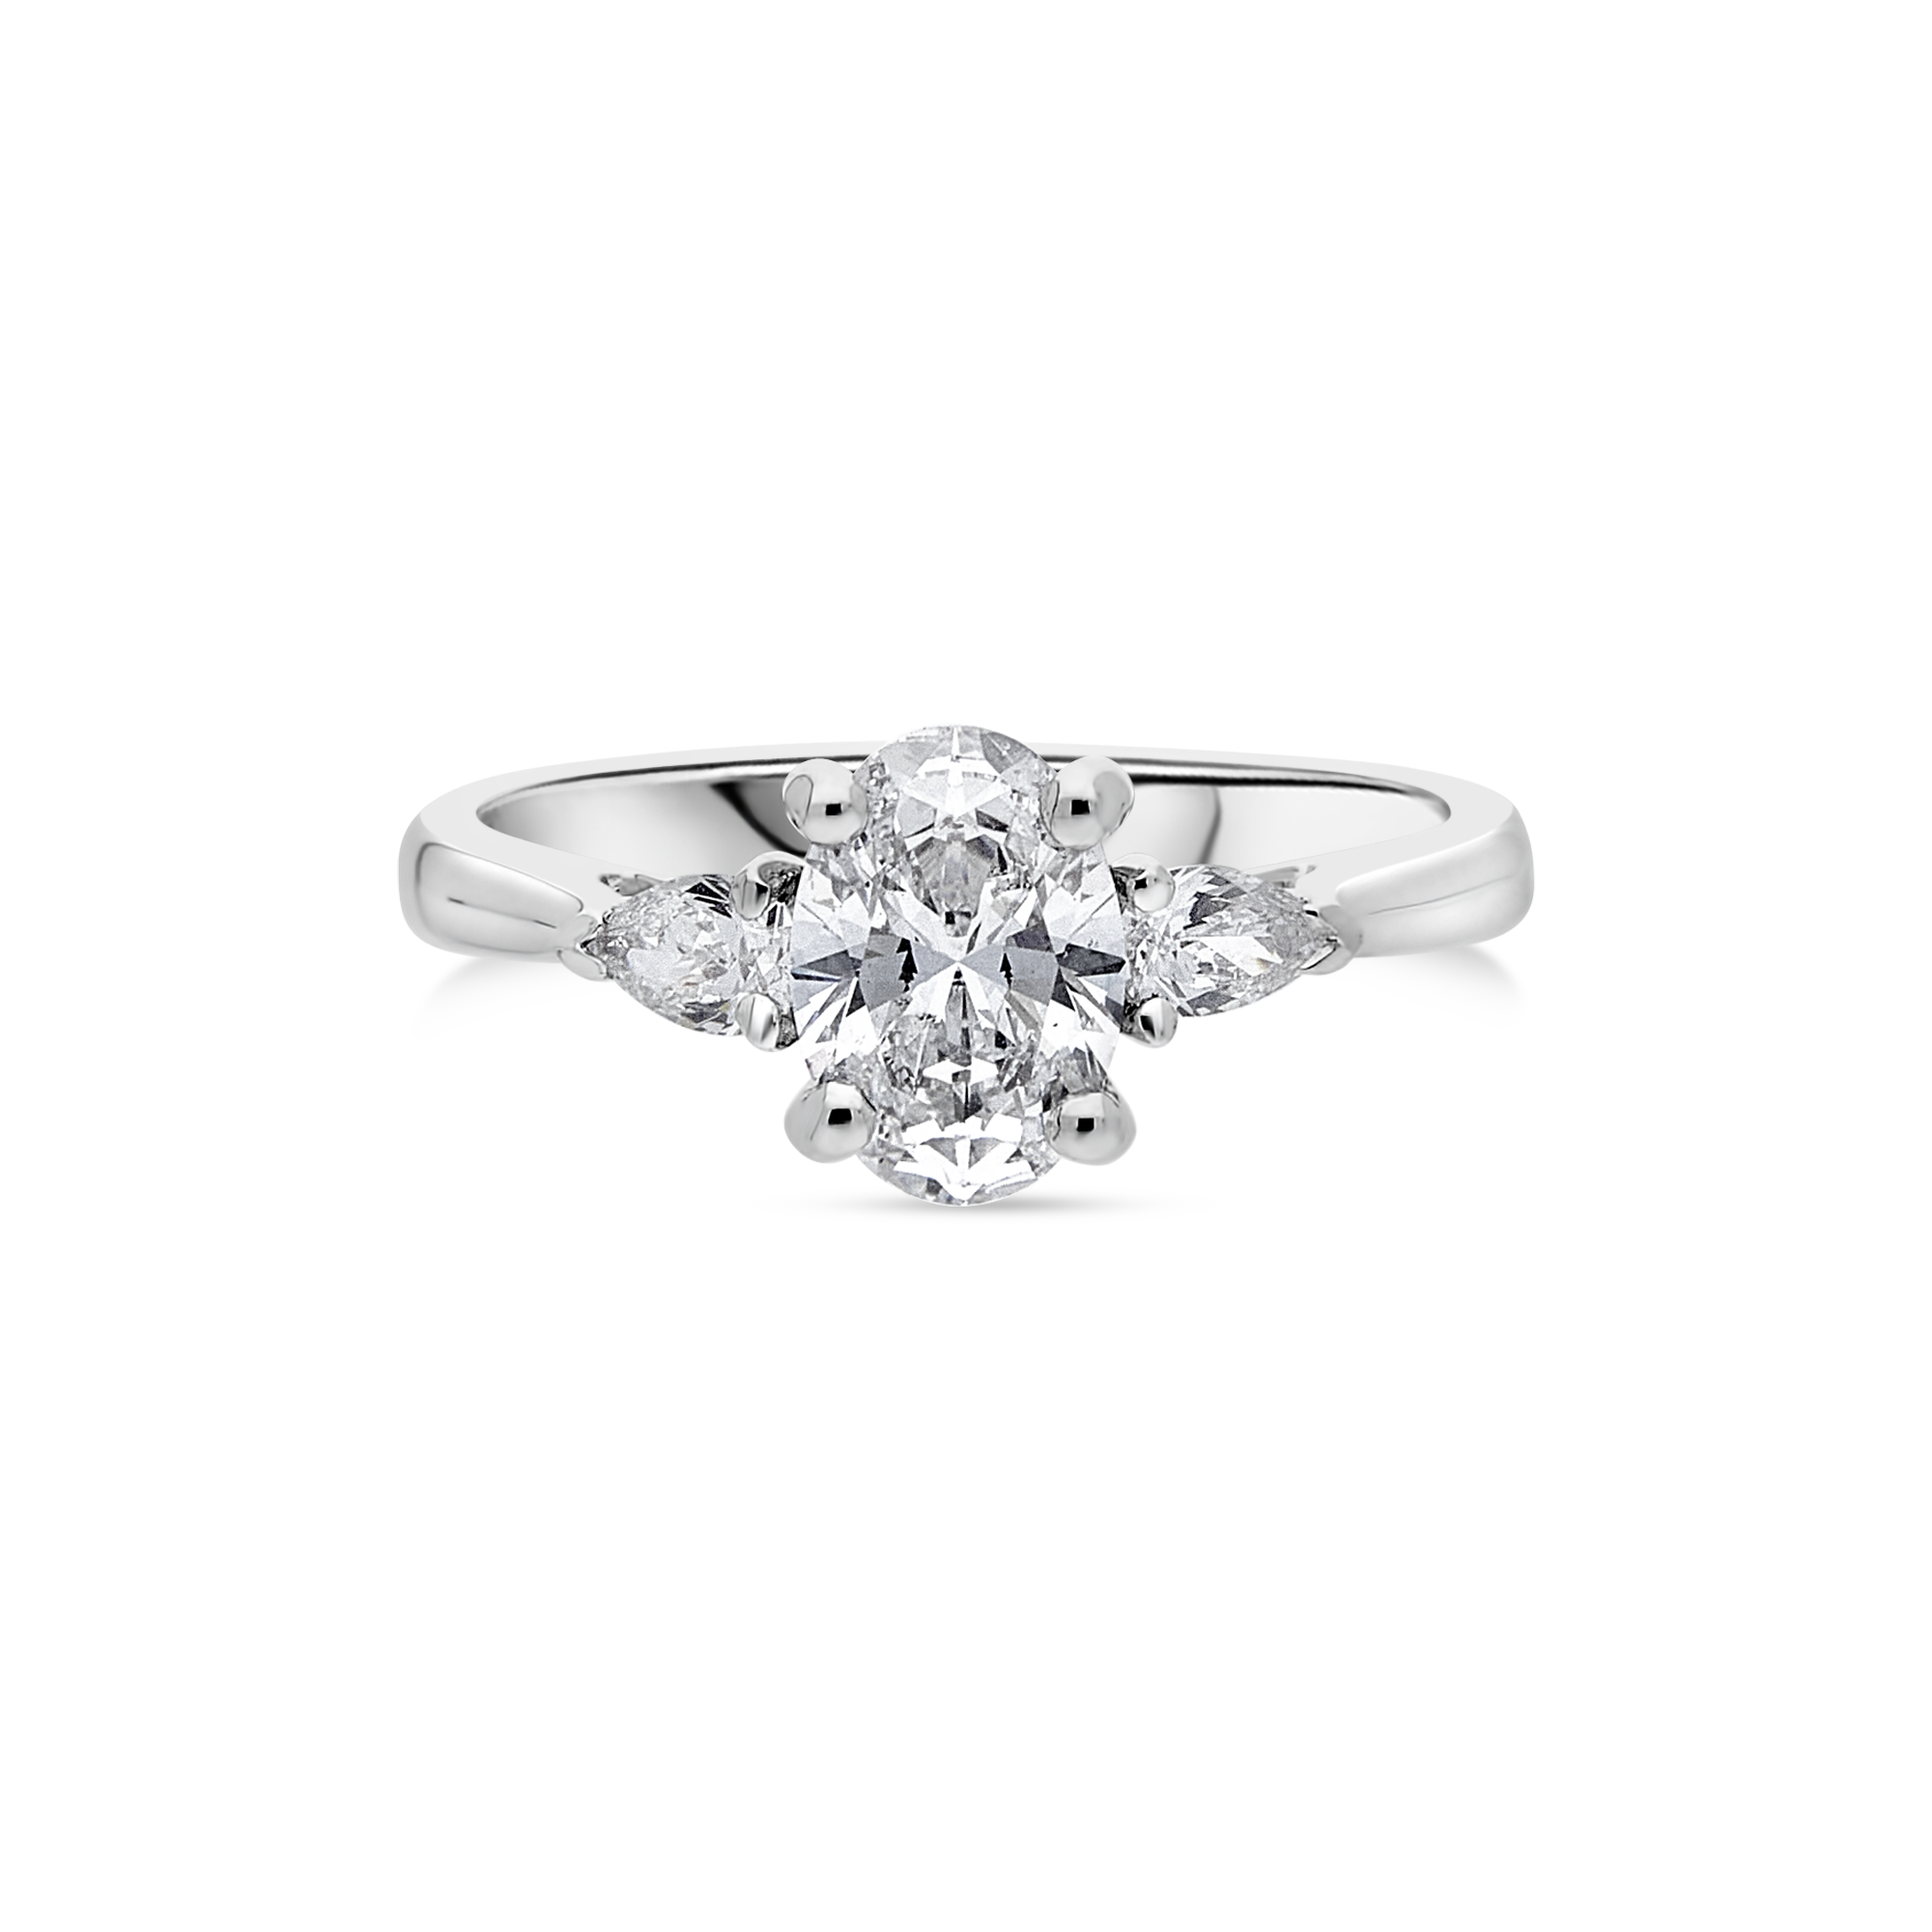 The "Tranquility" with Oval Diamond Platinum